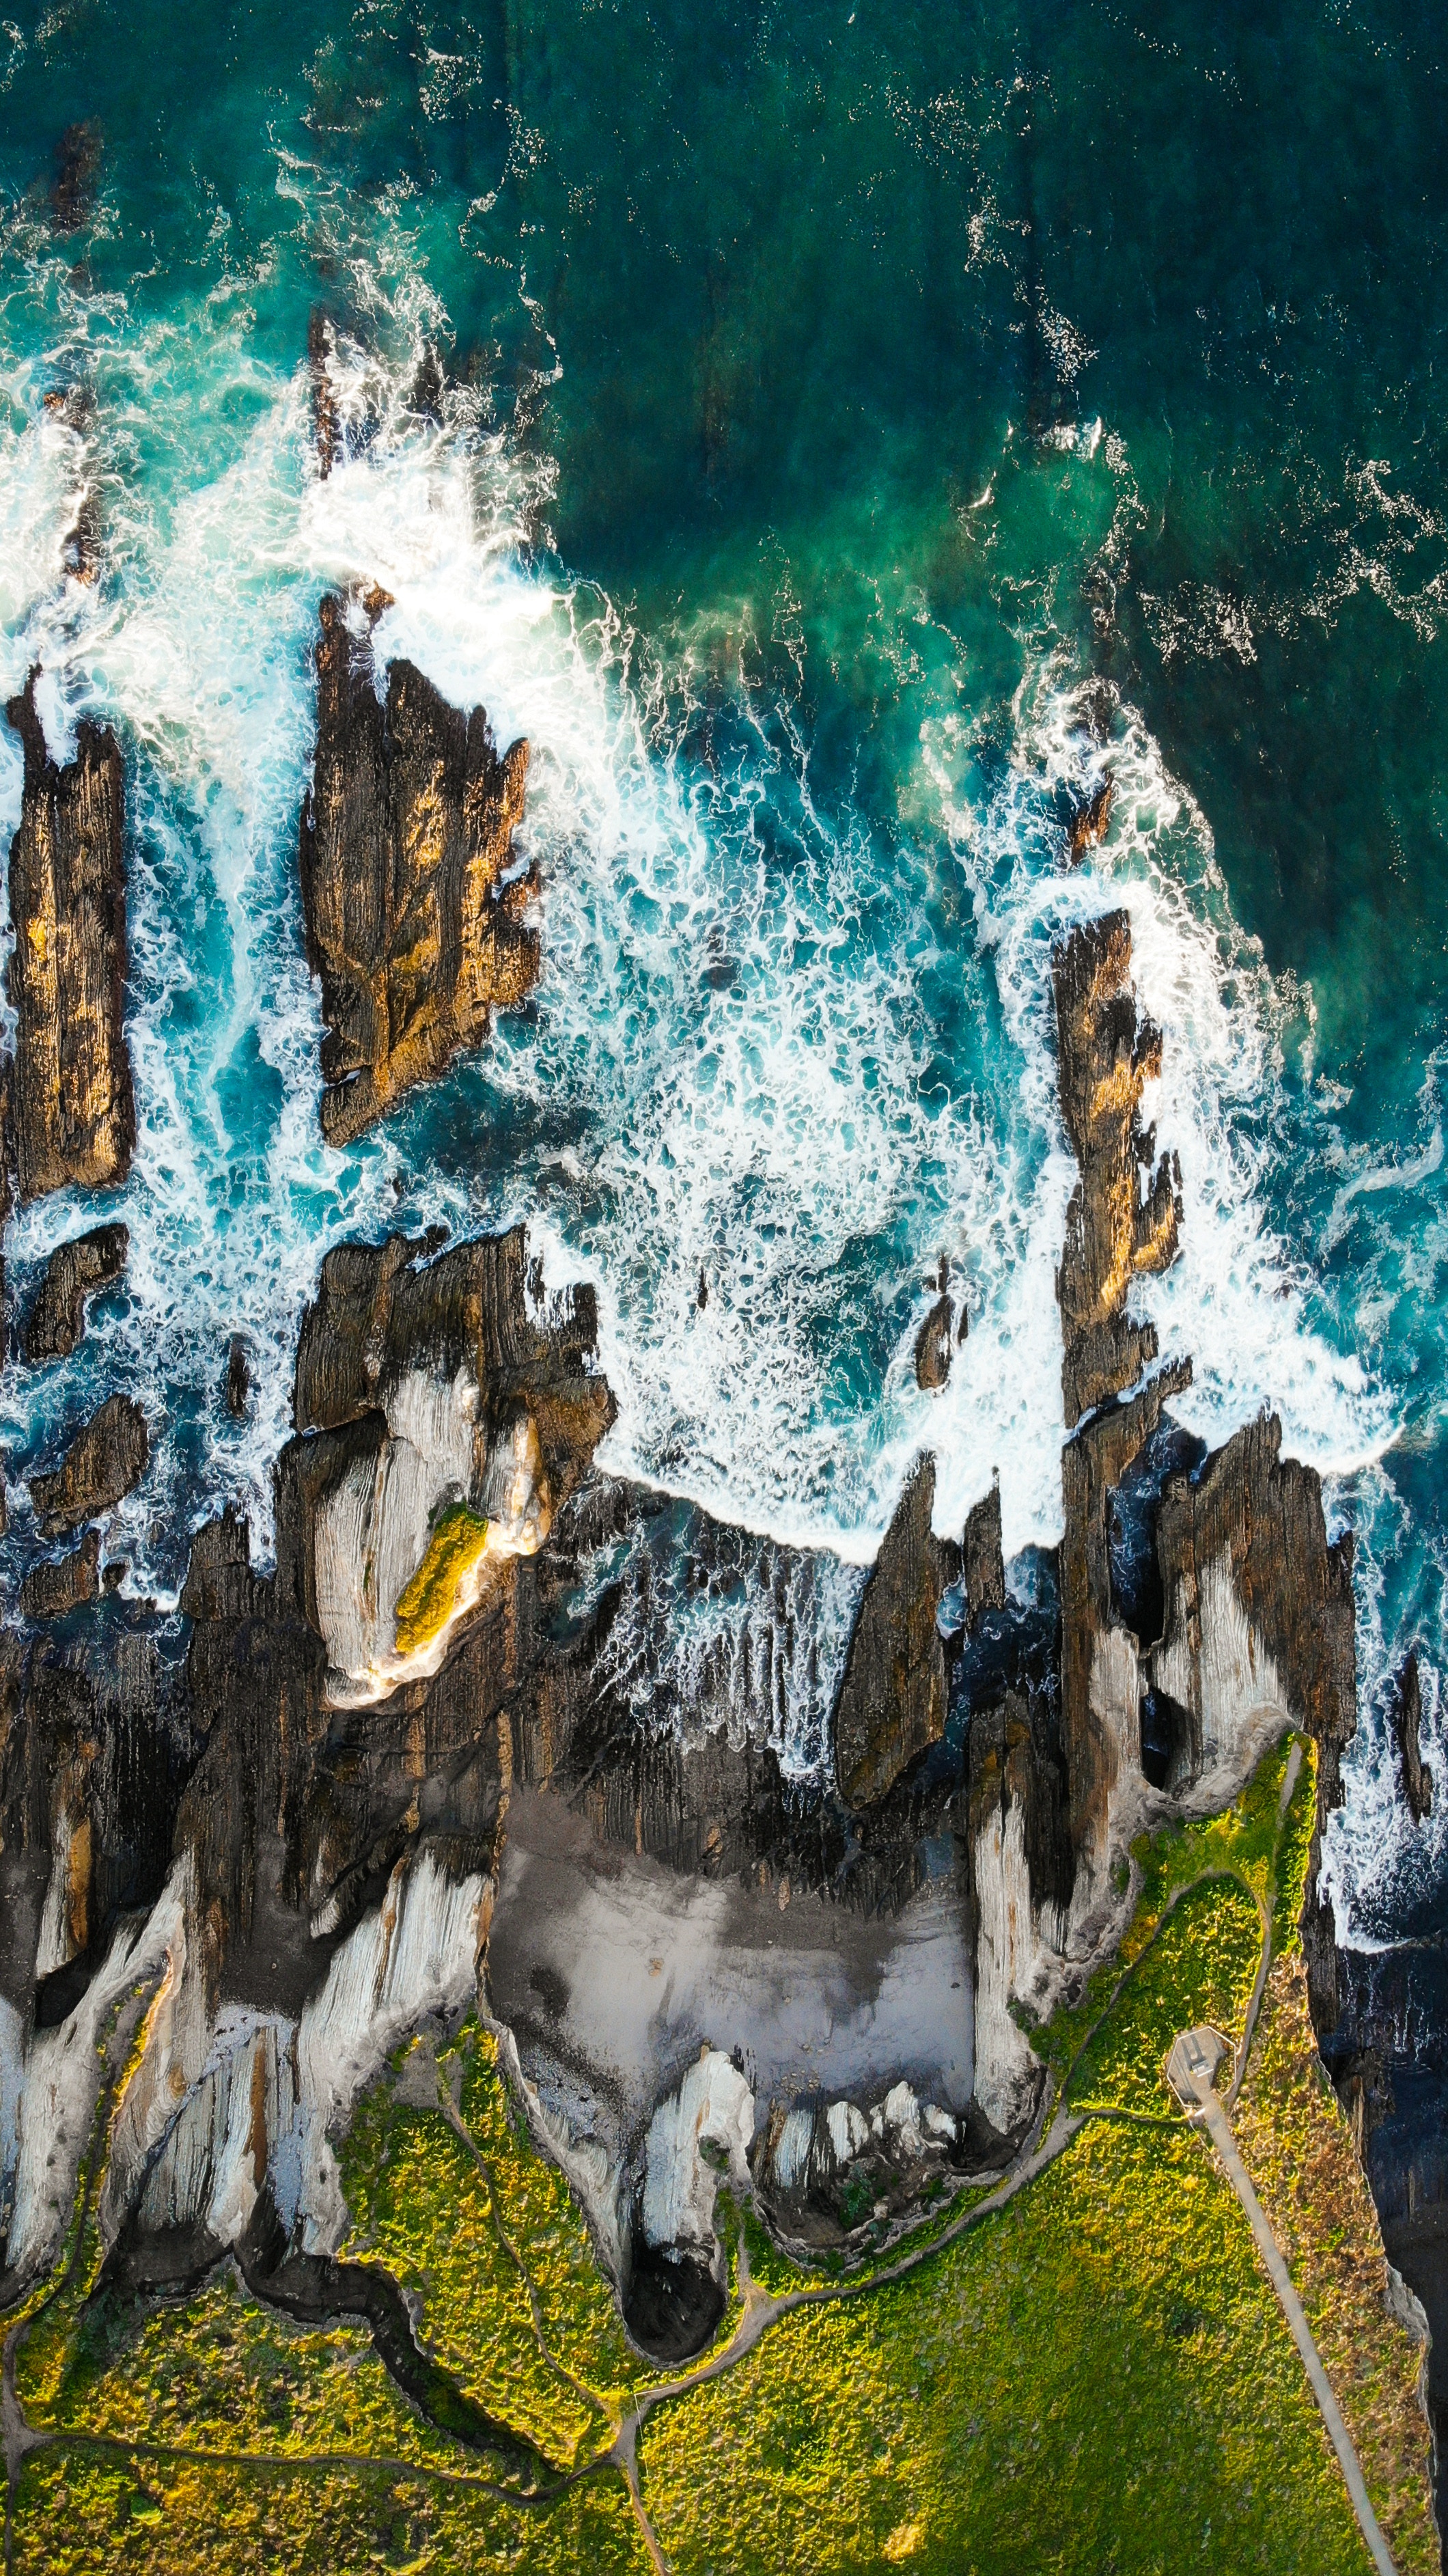 1080p Wallpaper surf, nature, waves, ocean View From Above